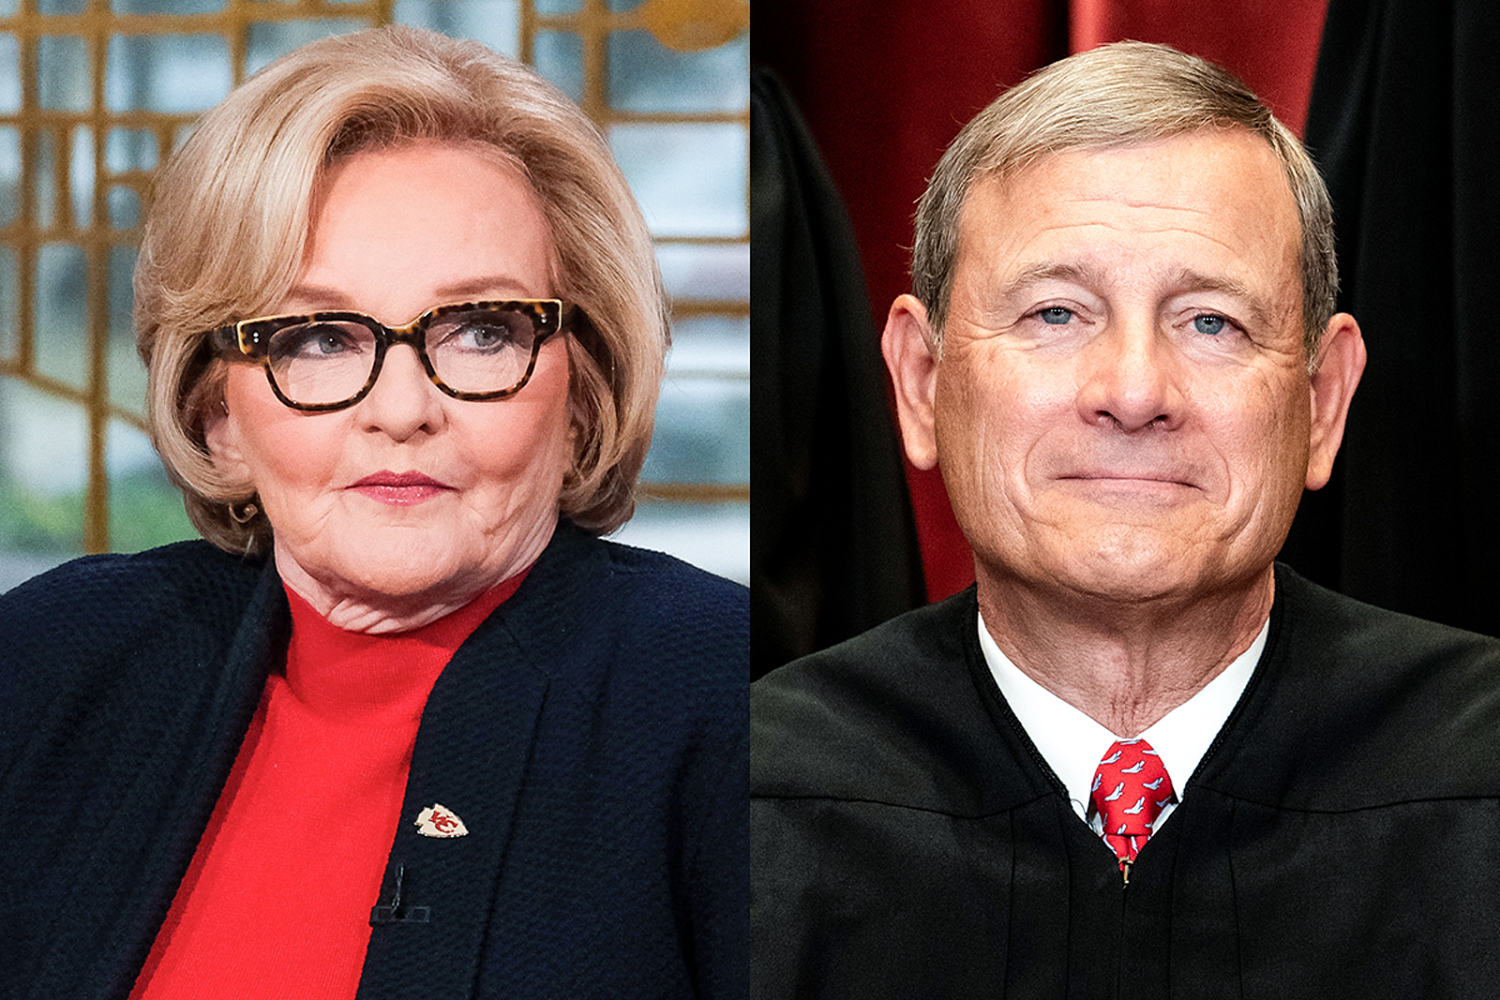 Americans want SCOTUS reform — but 'arrogant' justices are standing in the way